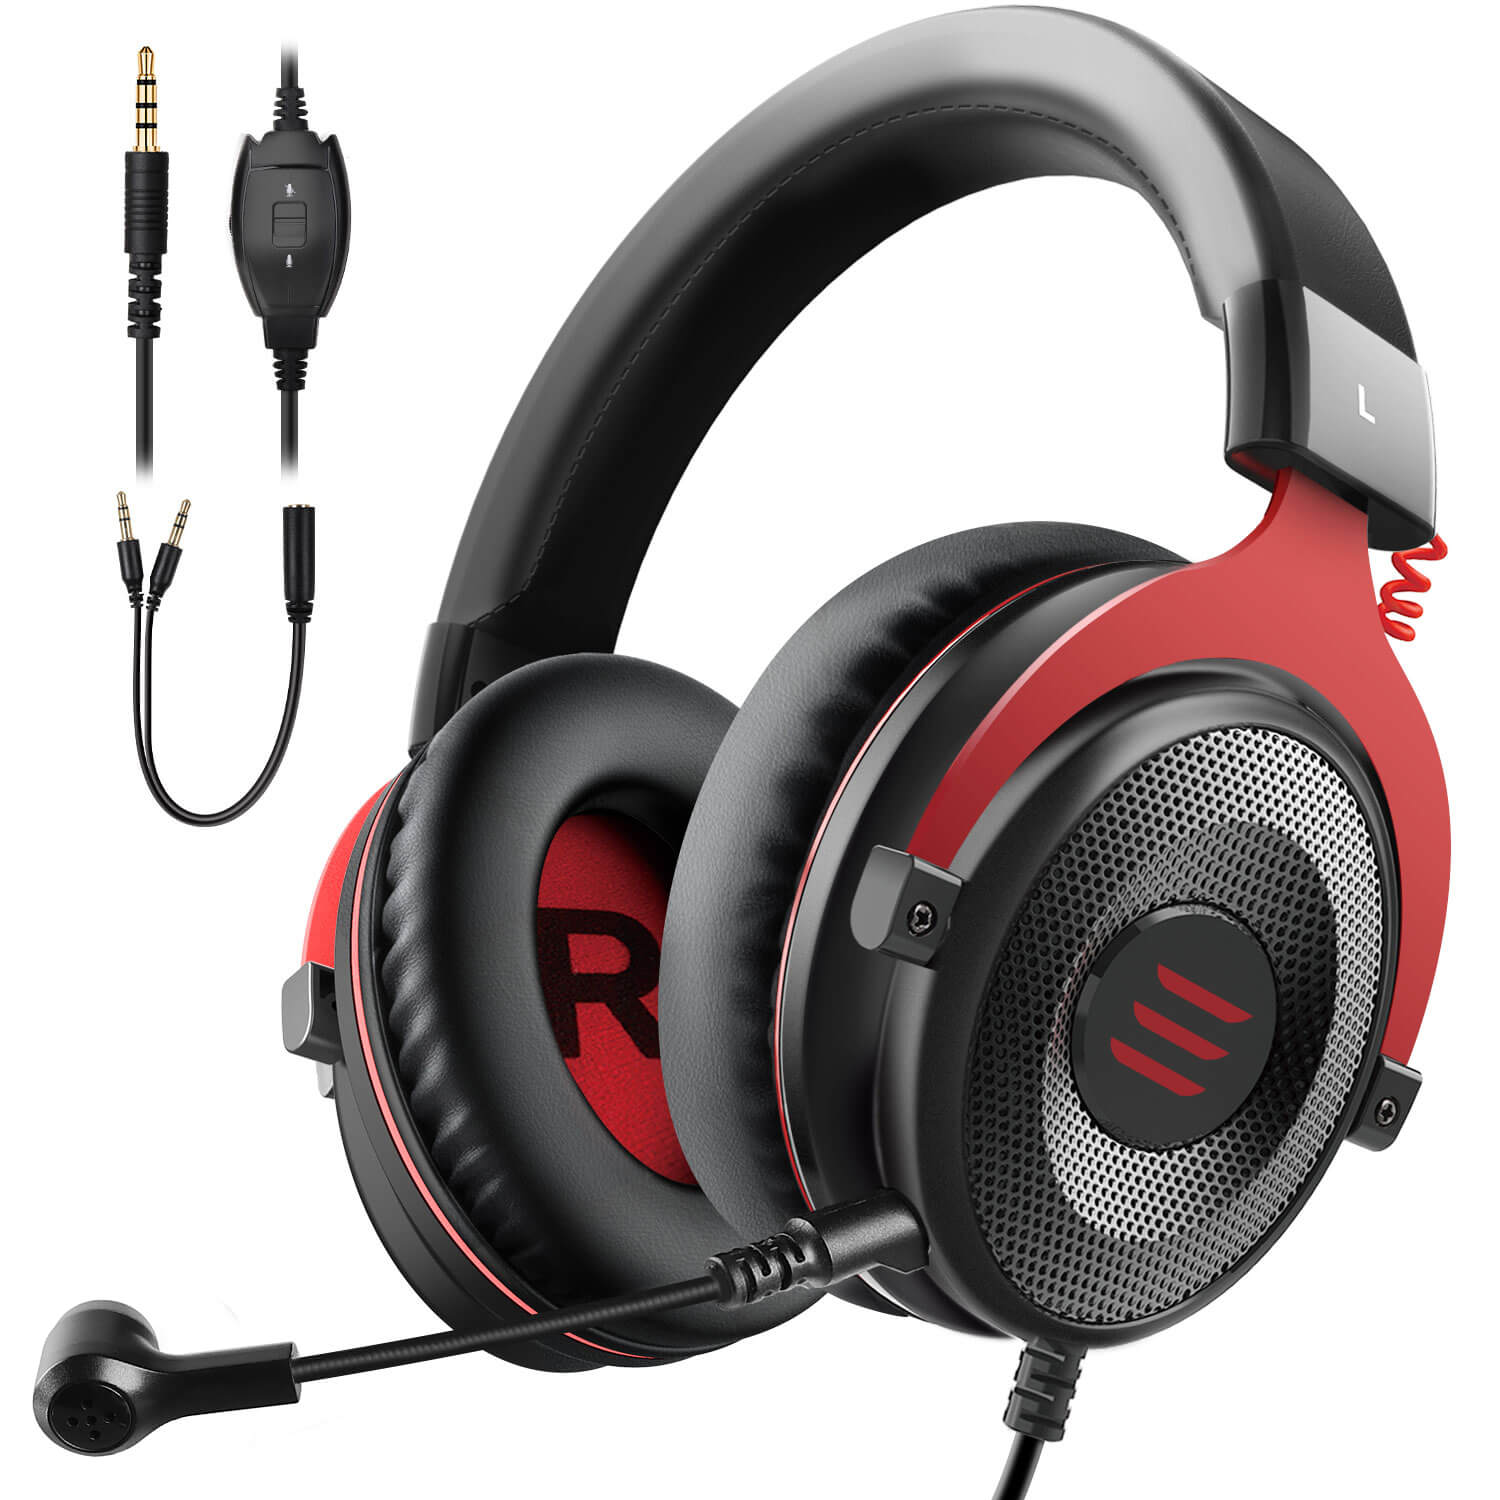 Wired Stereo Gaming Headset-Over Ear Headphones with Noise Cancelling Mic for PS4, Xbox One, Nintendo Switch, PC, Mac, Laptop